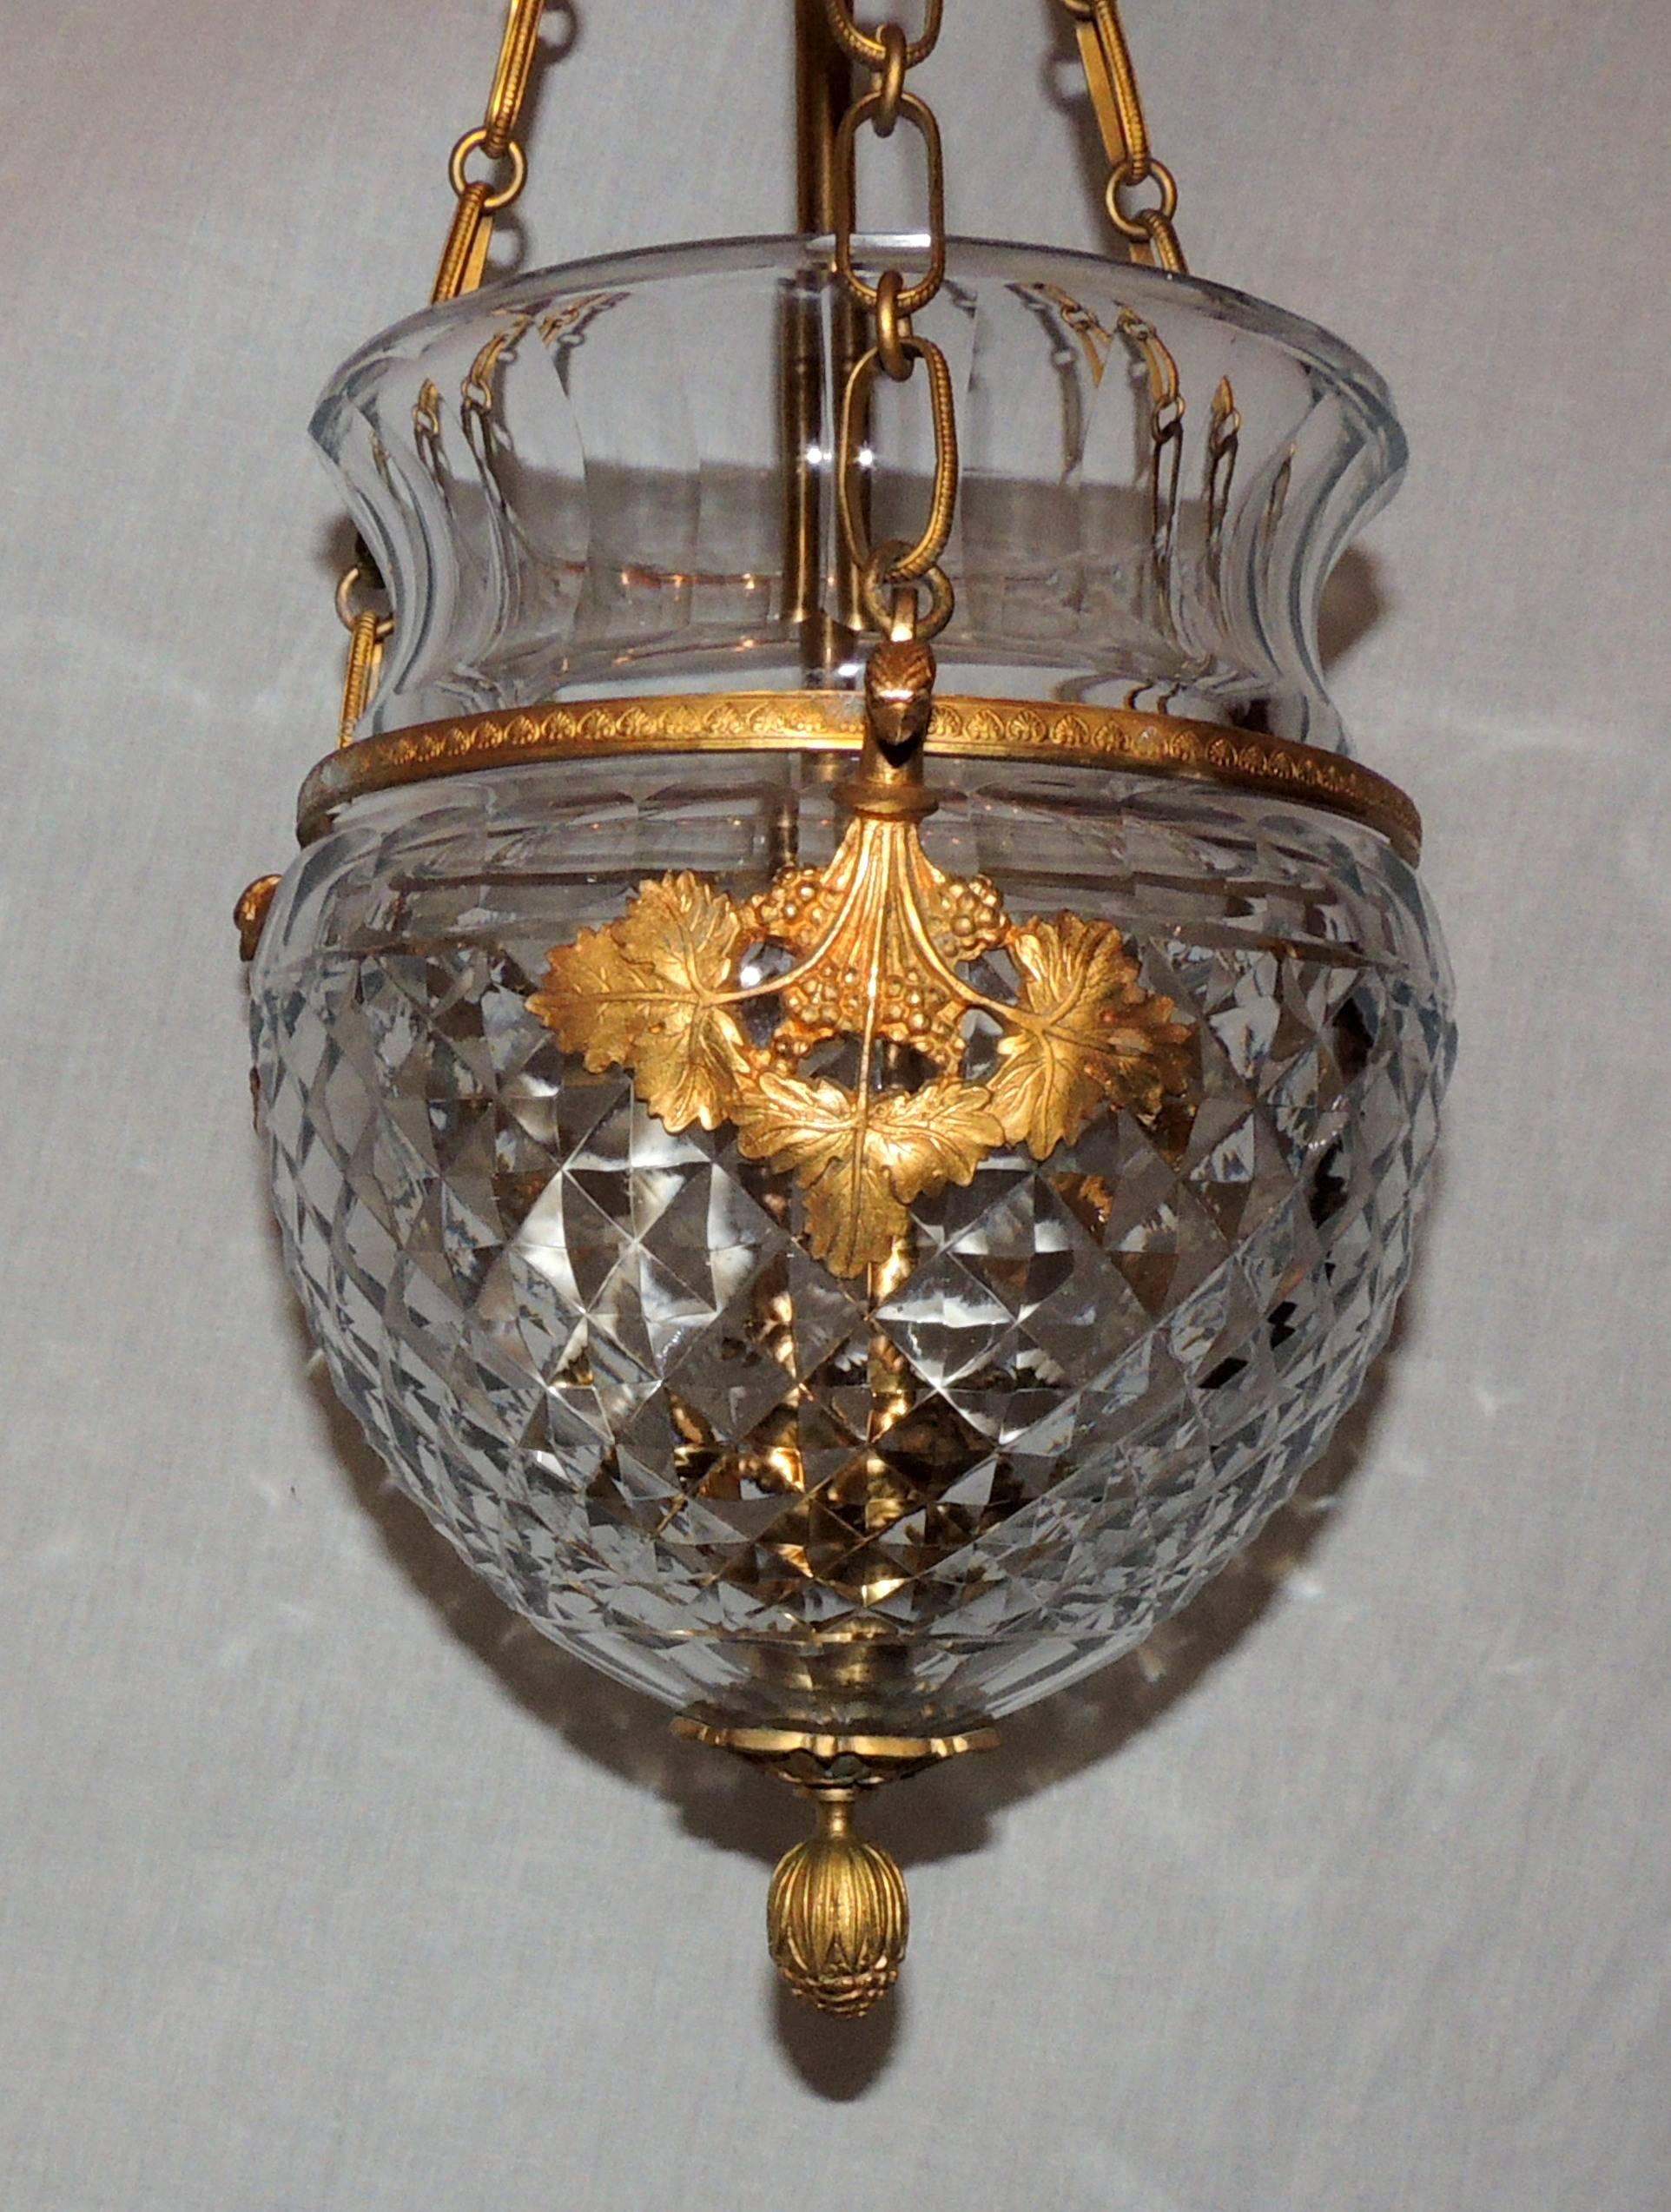 Faceted Wonderful French Bronze Crystal Neoclassical Empire Ormolu Lantern Chandelier